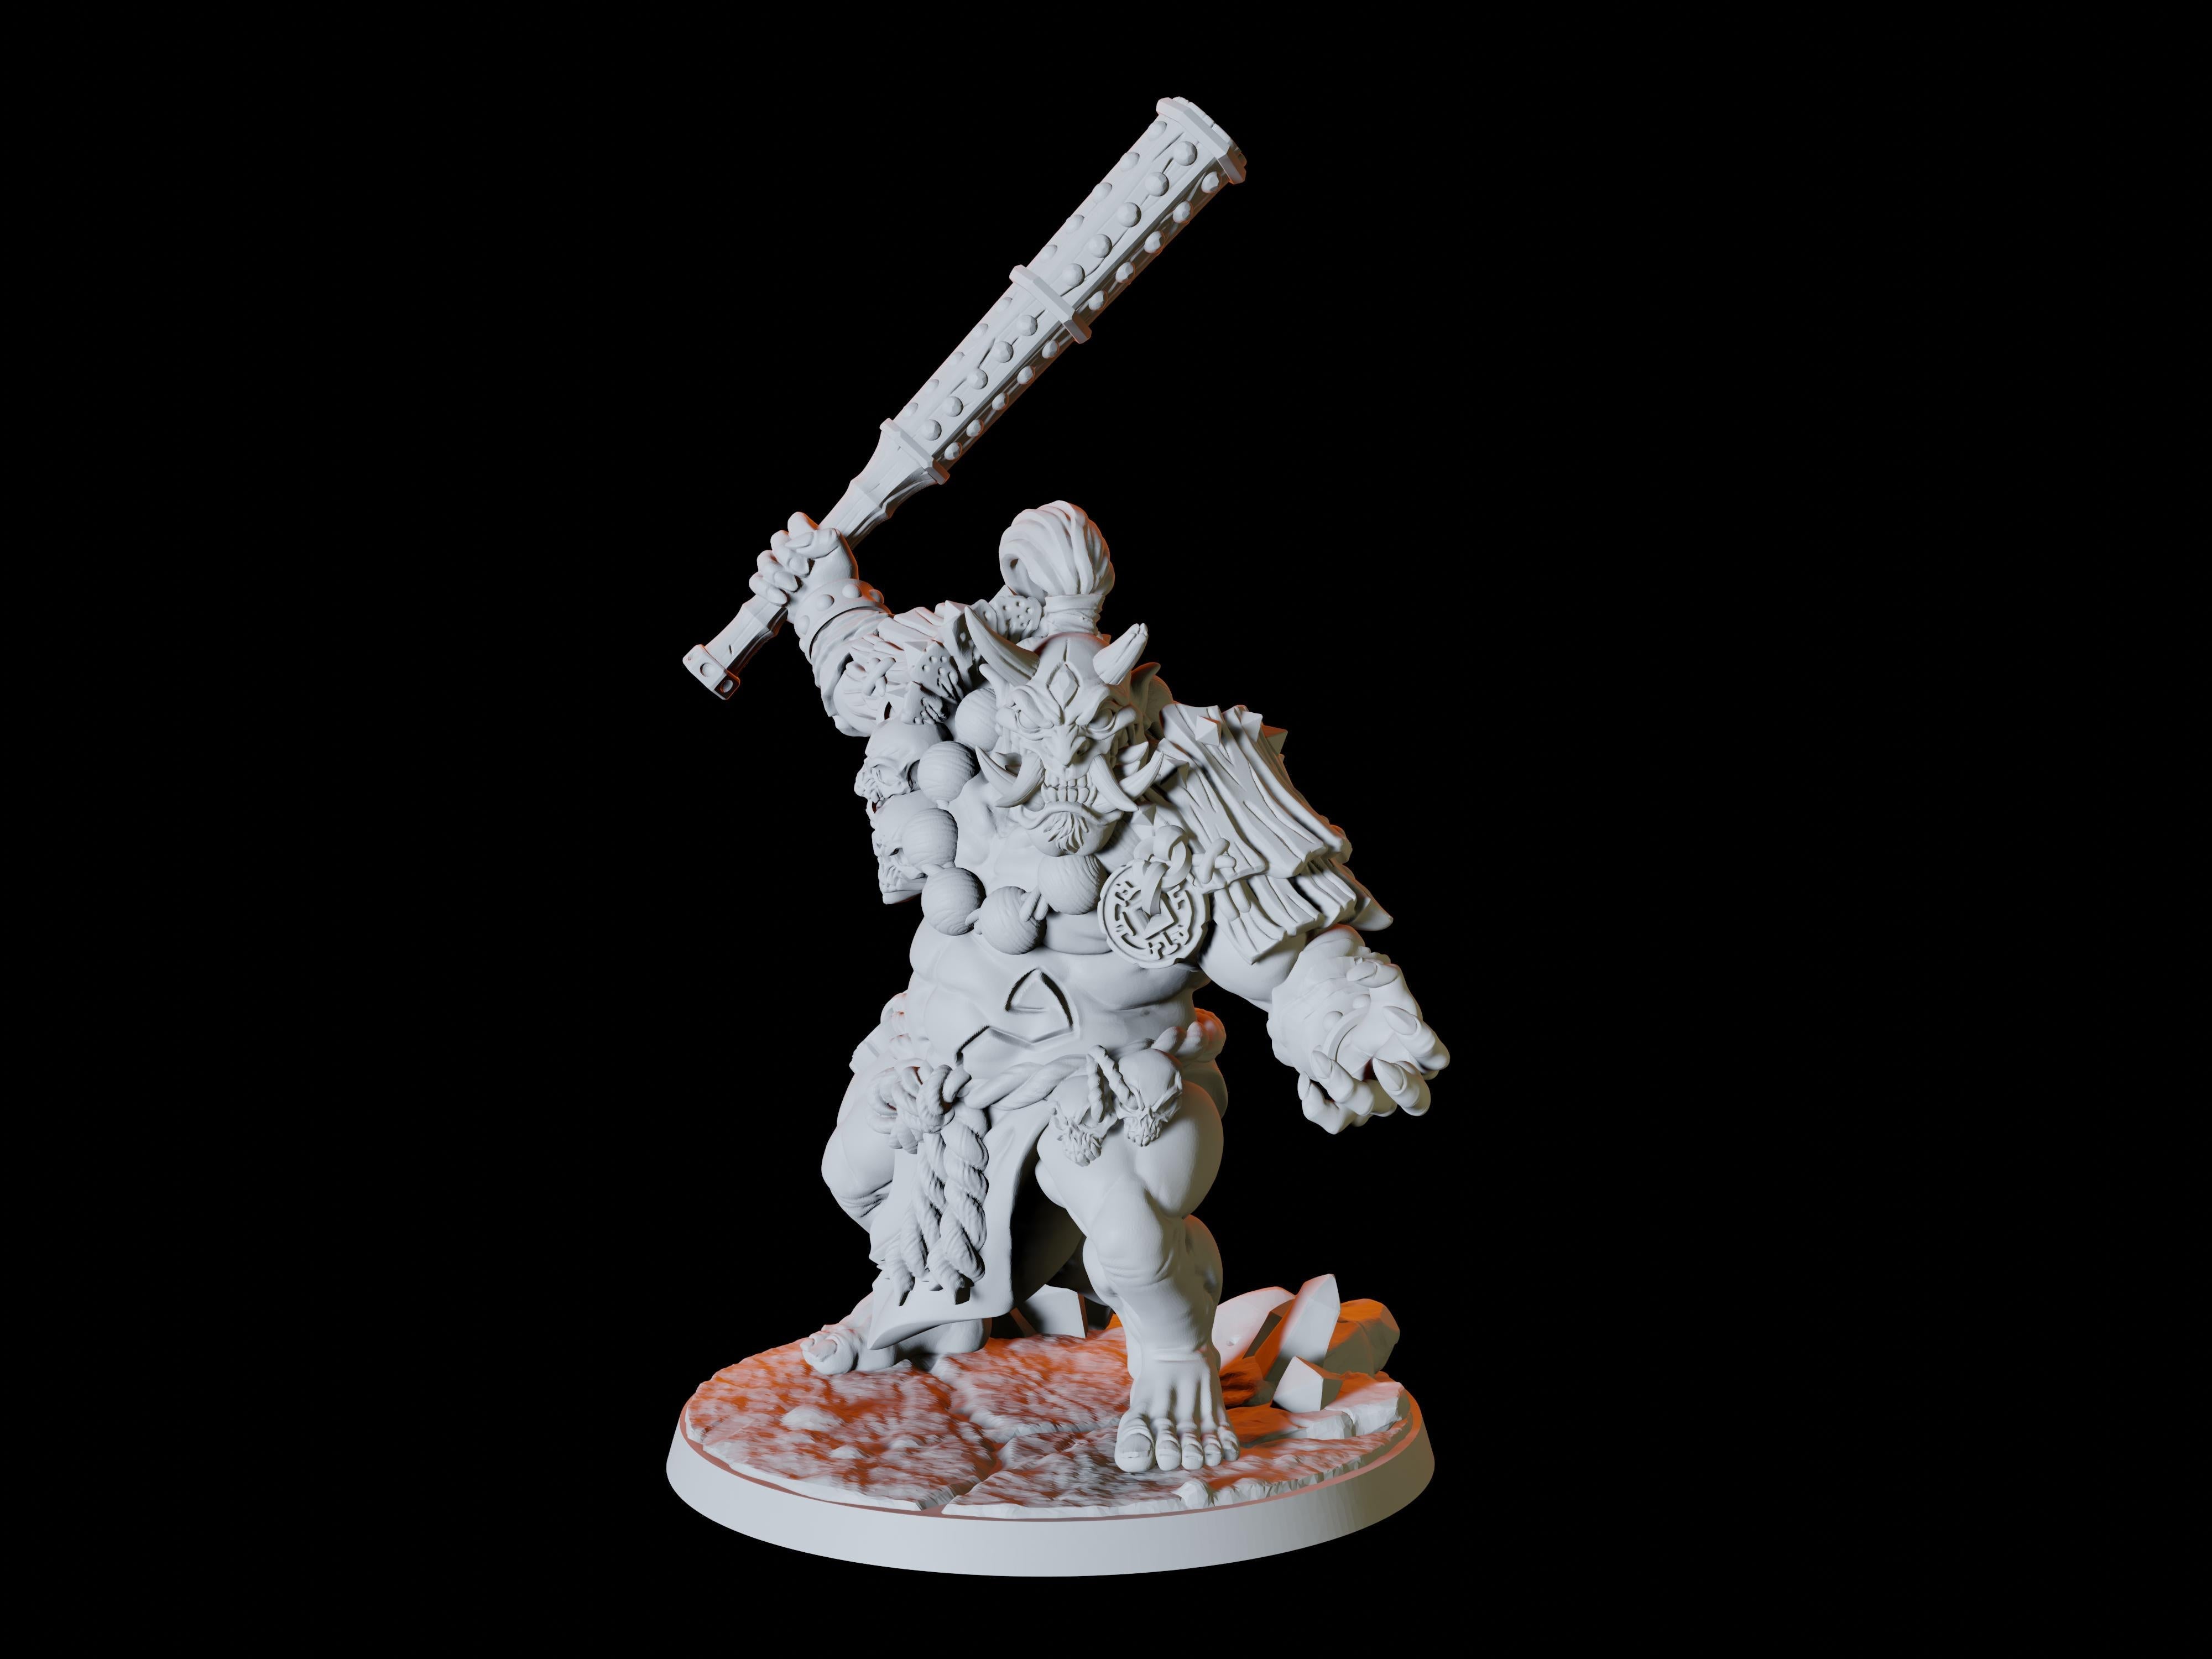 Two Japanese Inspired Ogre Miniatures for Dungeons and Dragons - Myth Forged